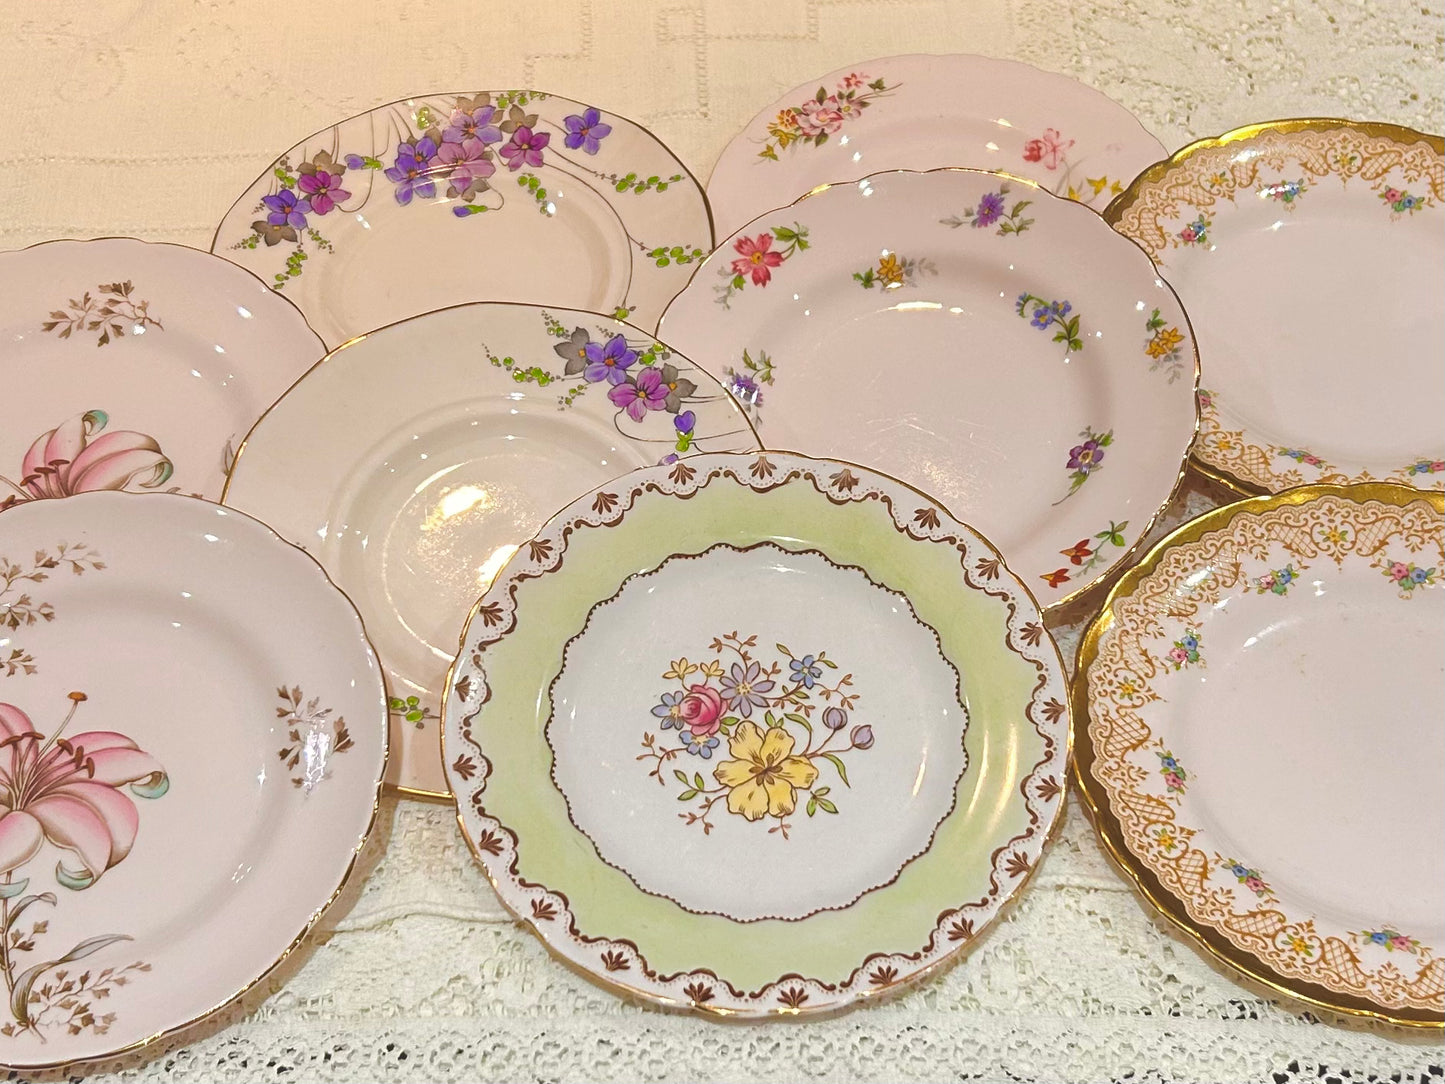 A set of 9 Tuscan Vintage Pink Tea Plates.  Excellent condition. A pretty vintage mixed set made in England by Tuscan China. A pink mis matched set. Fully backstamped. Lots of pretty flower in shades of pink, purple and yellow.  Diameter 7". 